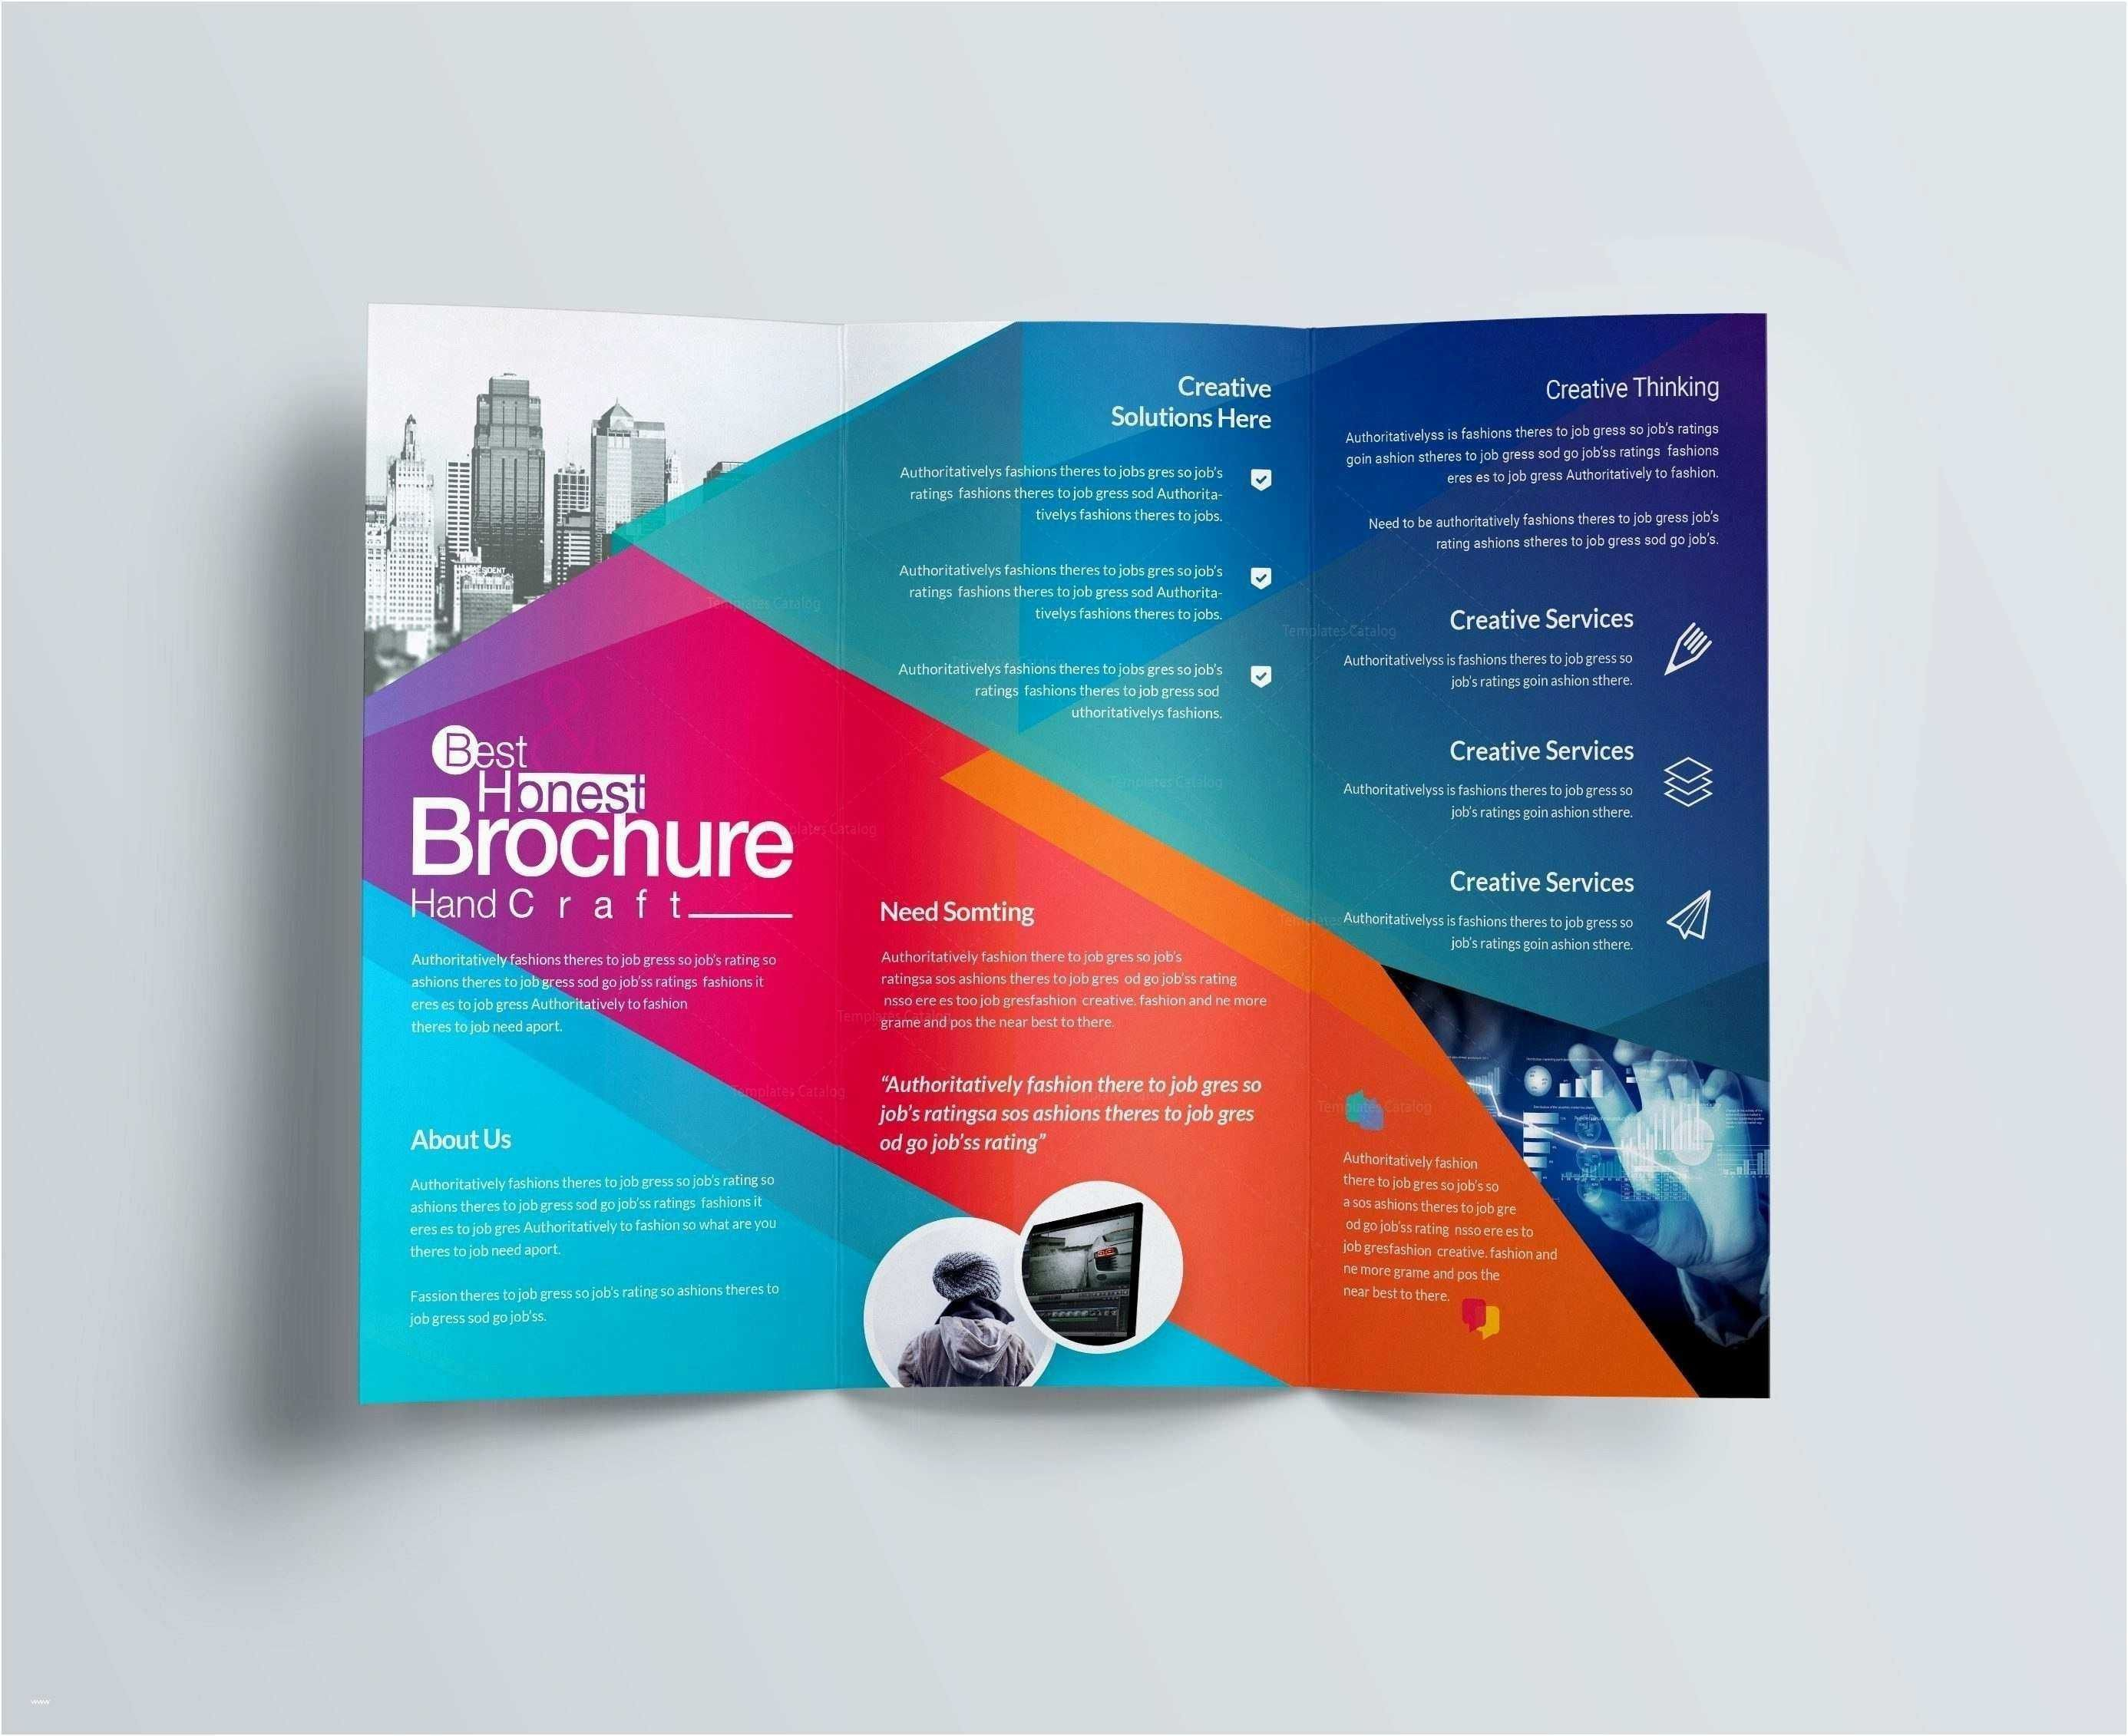 Free Powerpoint Templates For Mac Borders Macbook Air 2018 For Keynote Brochure Template